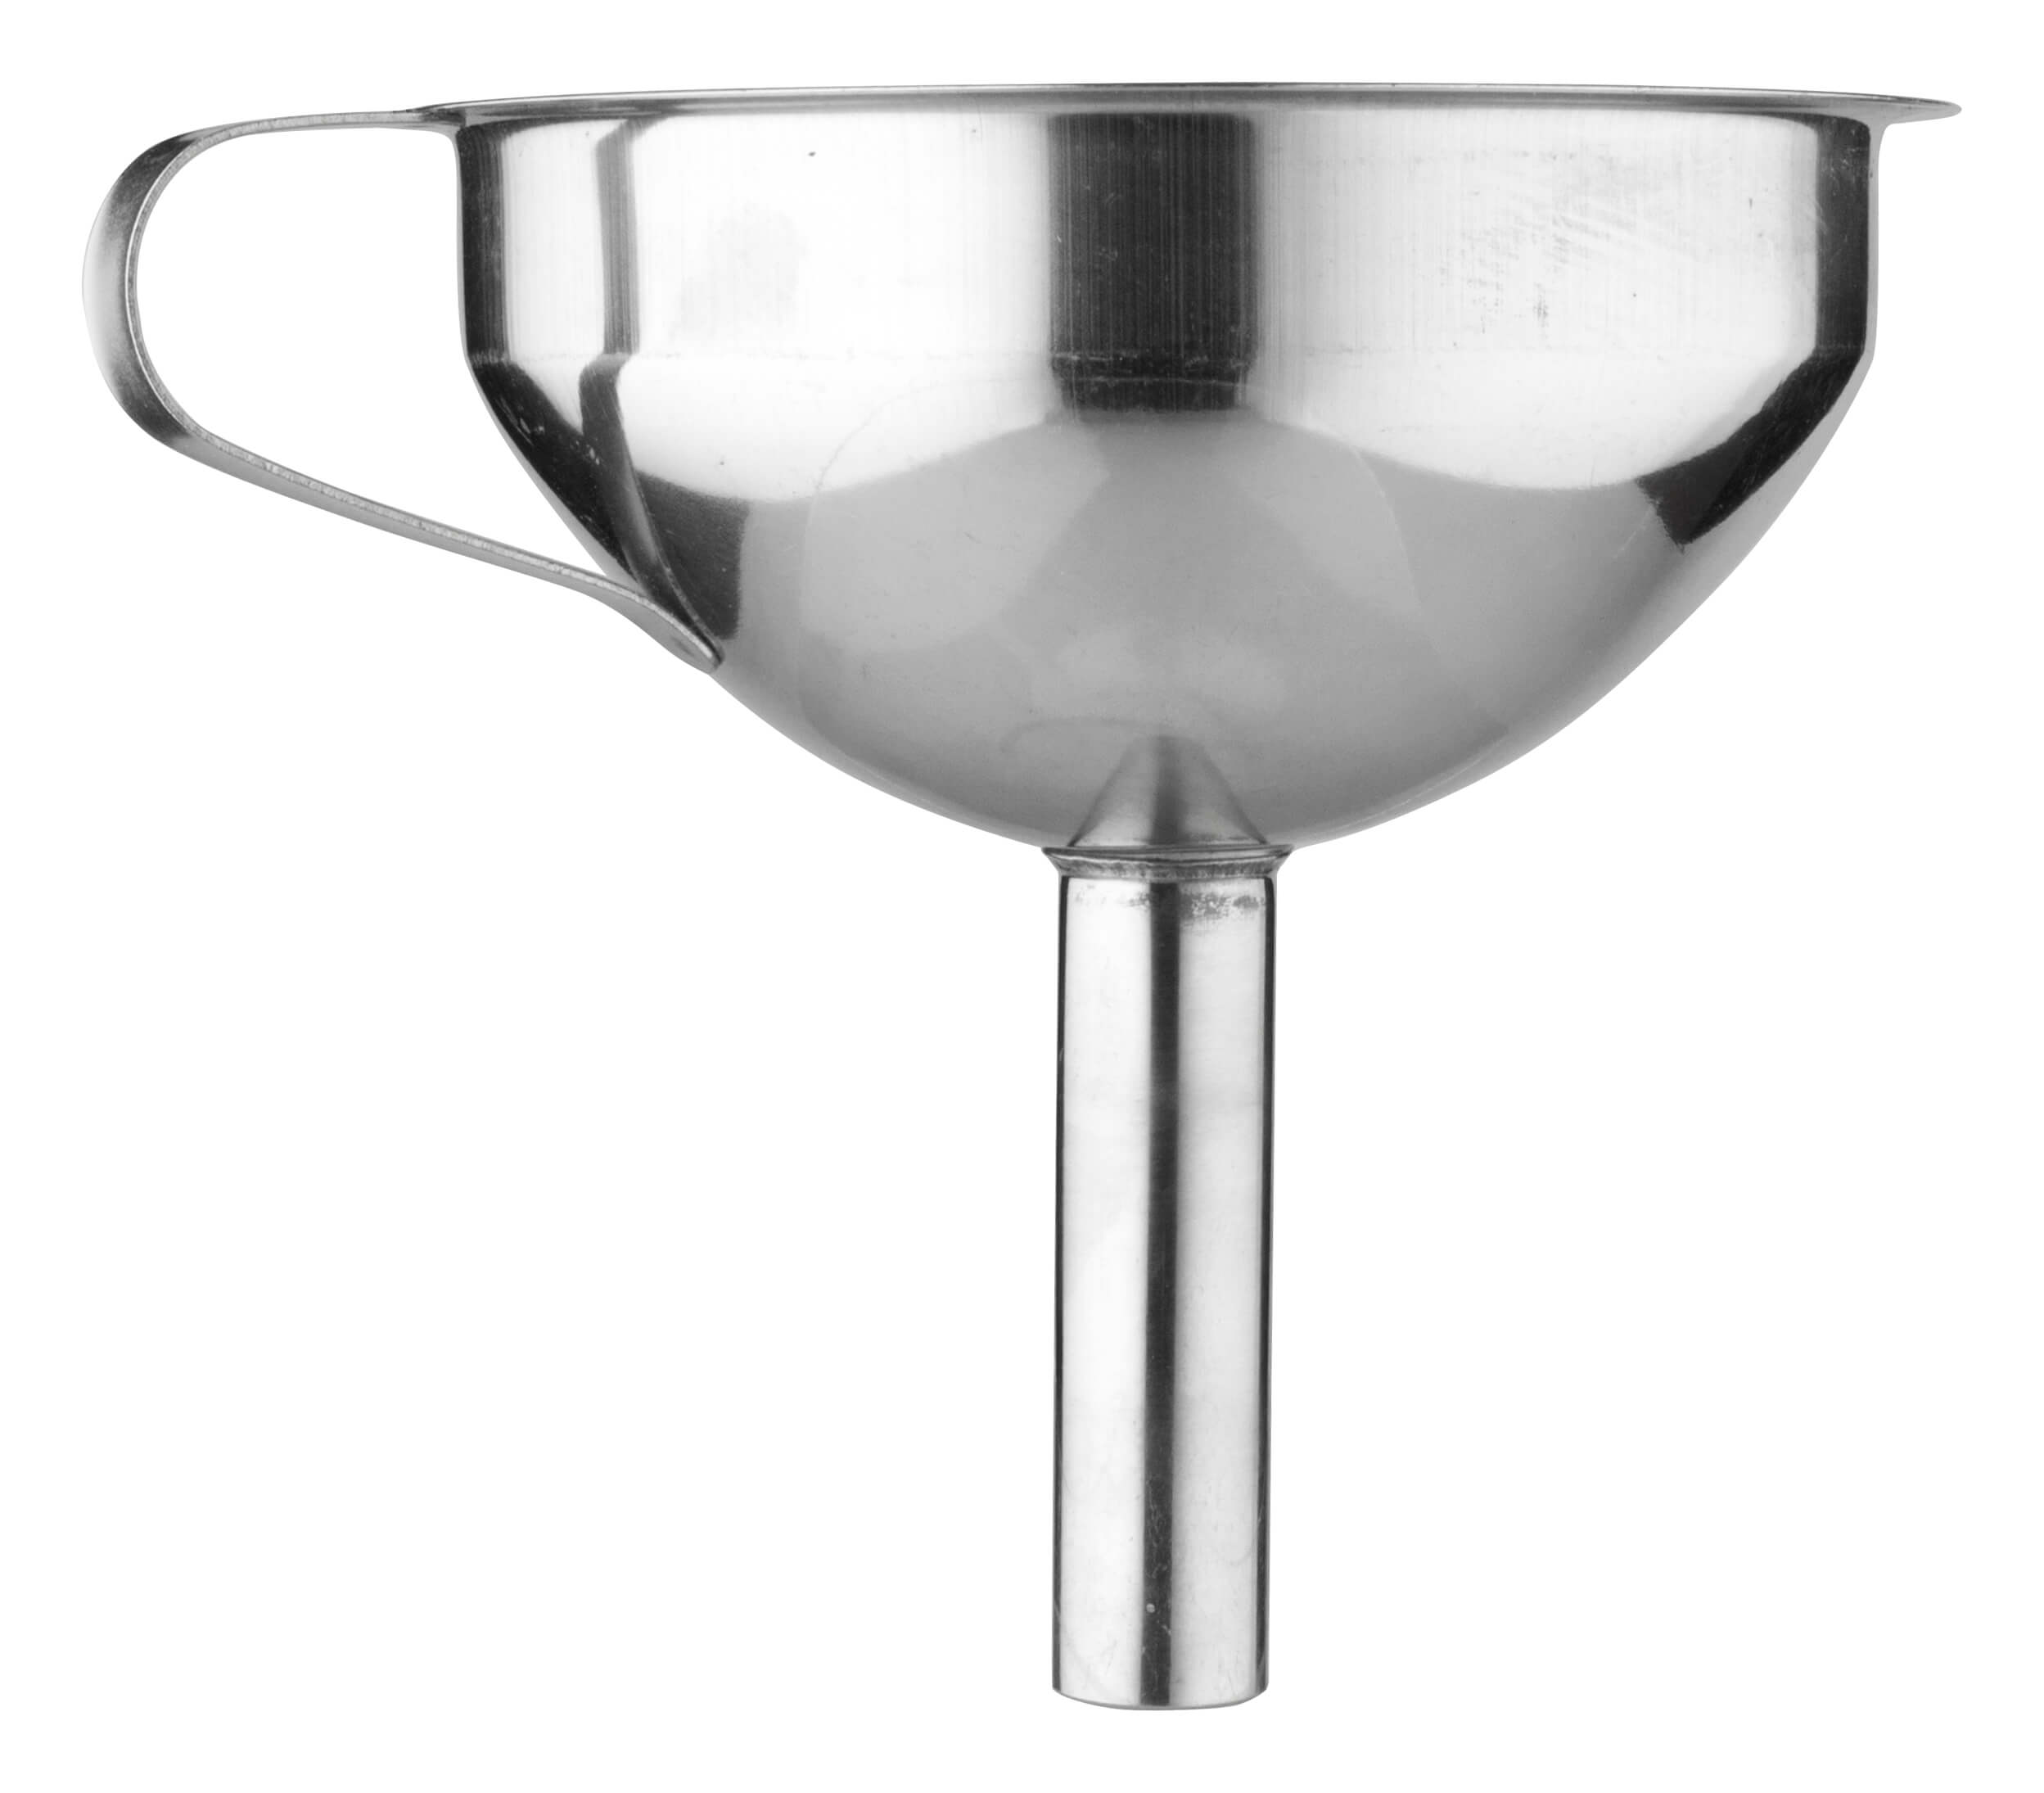 Bottle funnel with strainer - stainless steel